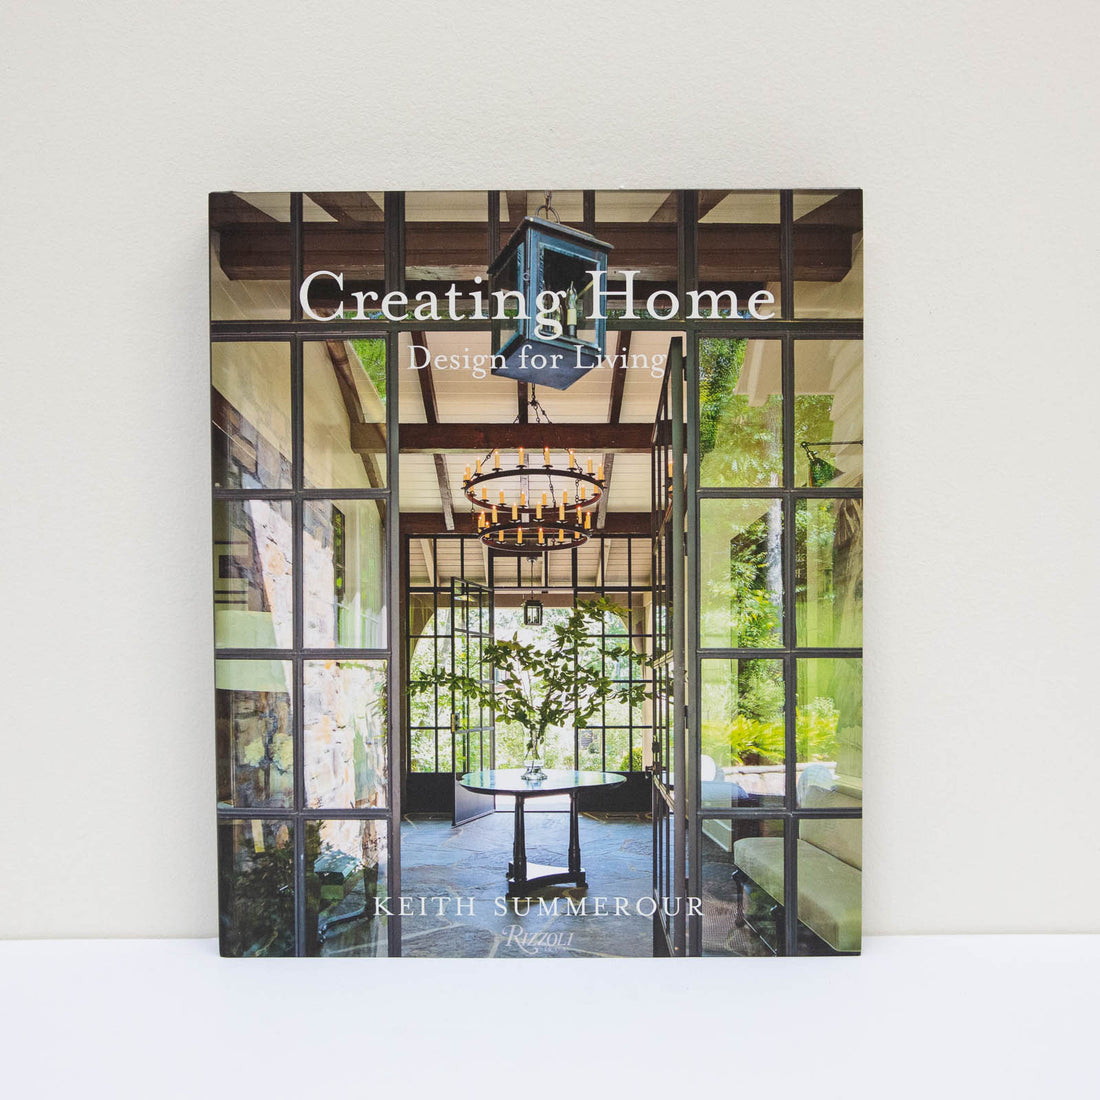 Creating Home: Design for Living